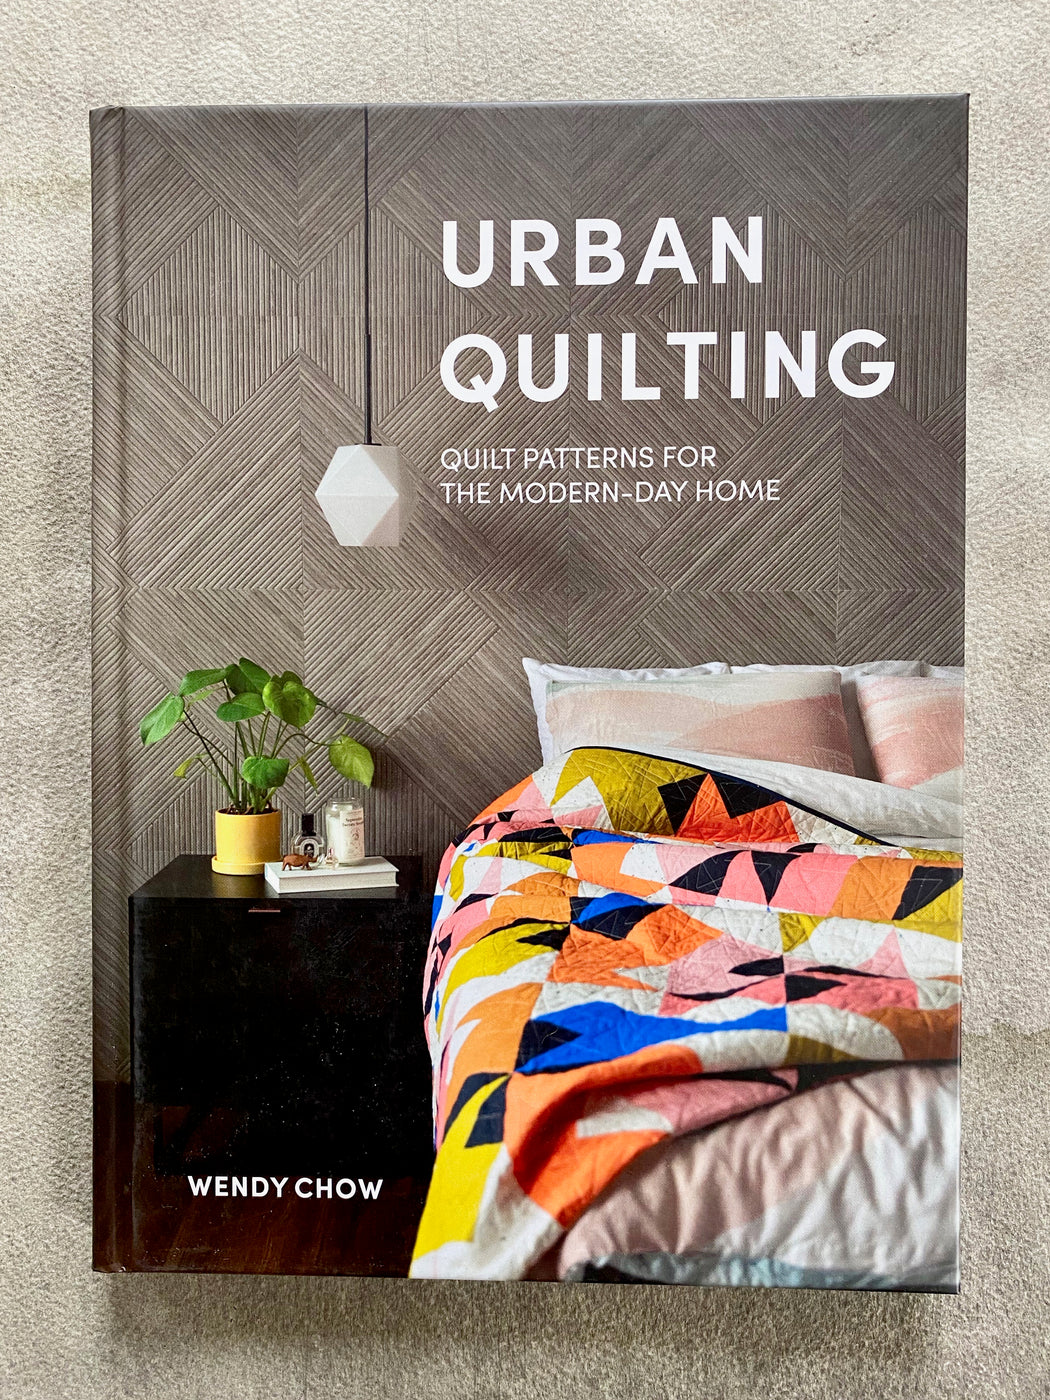 "Urban Quilting" by Wendy Chow